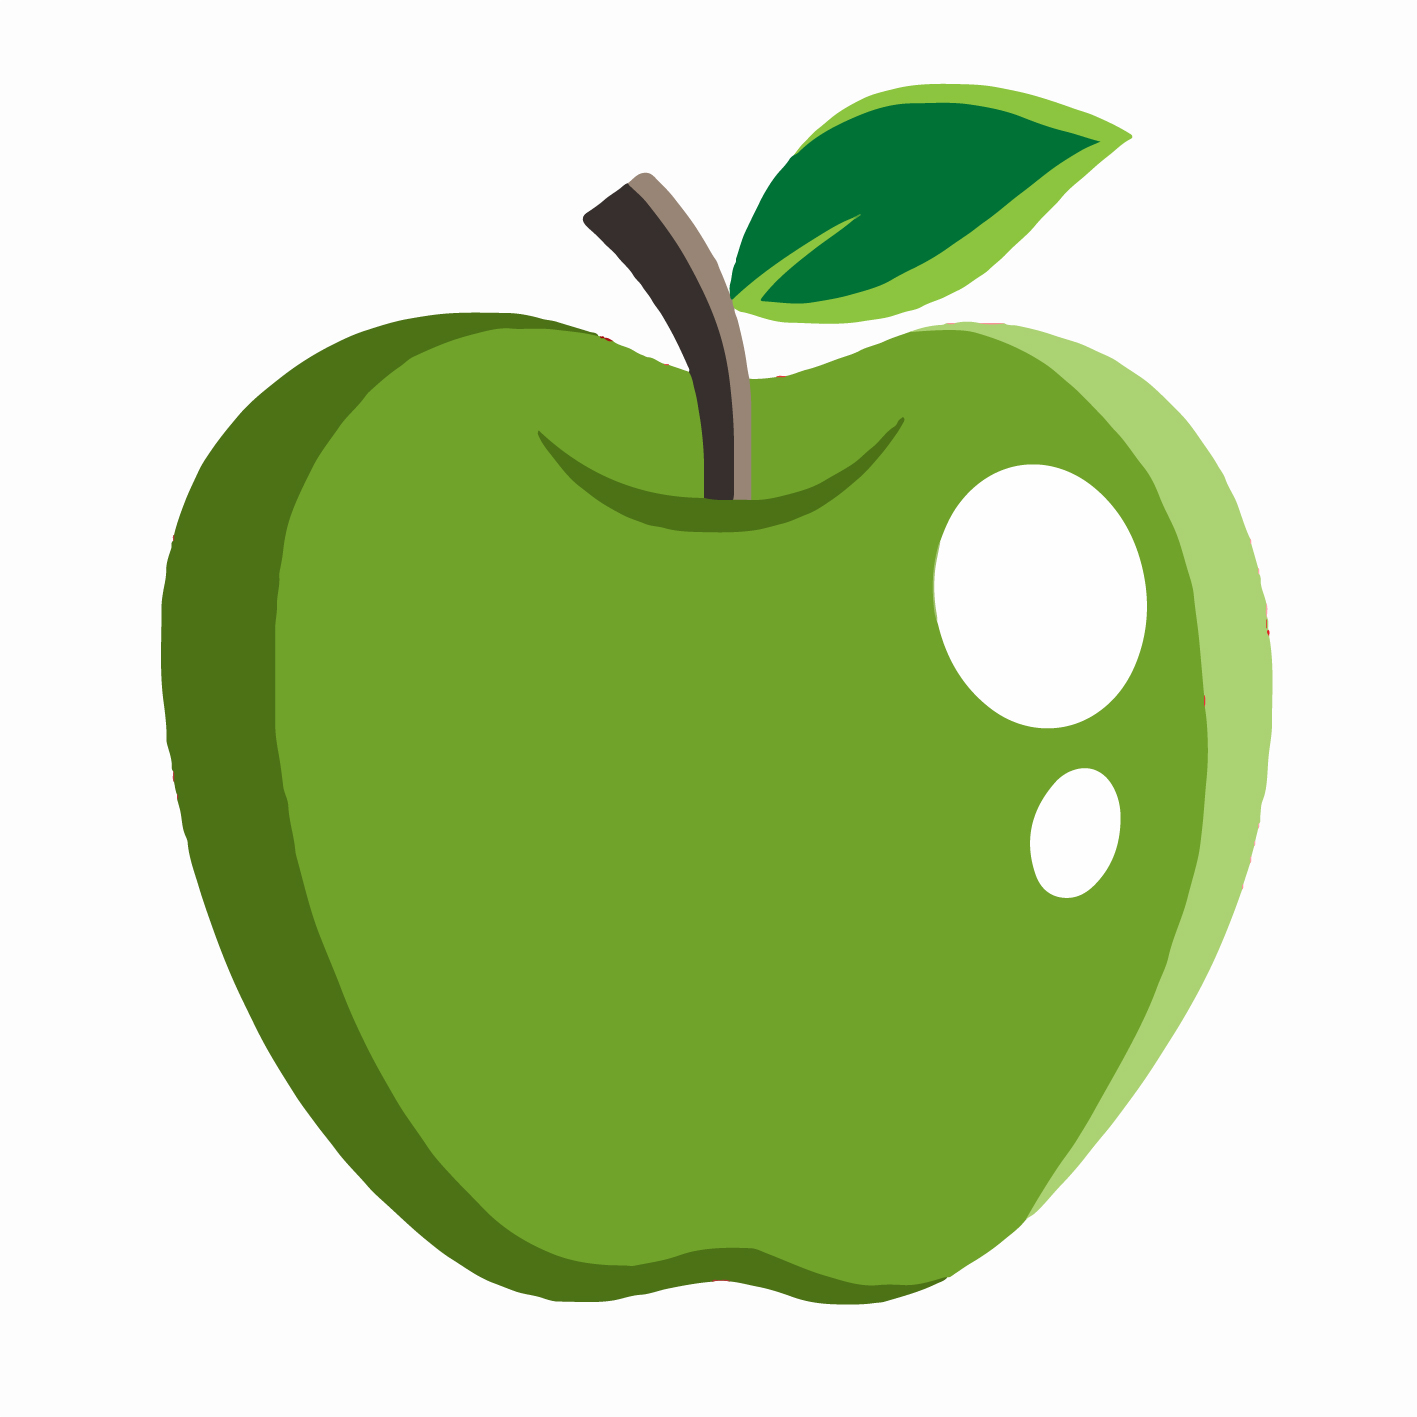 green apple clipart illustration drawing picture